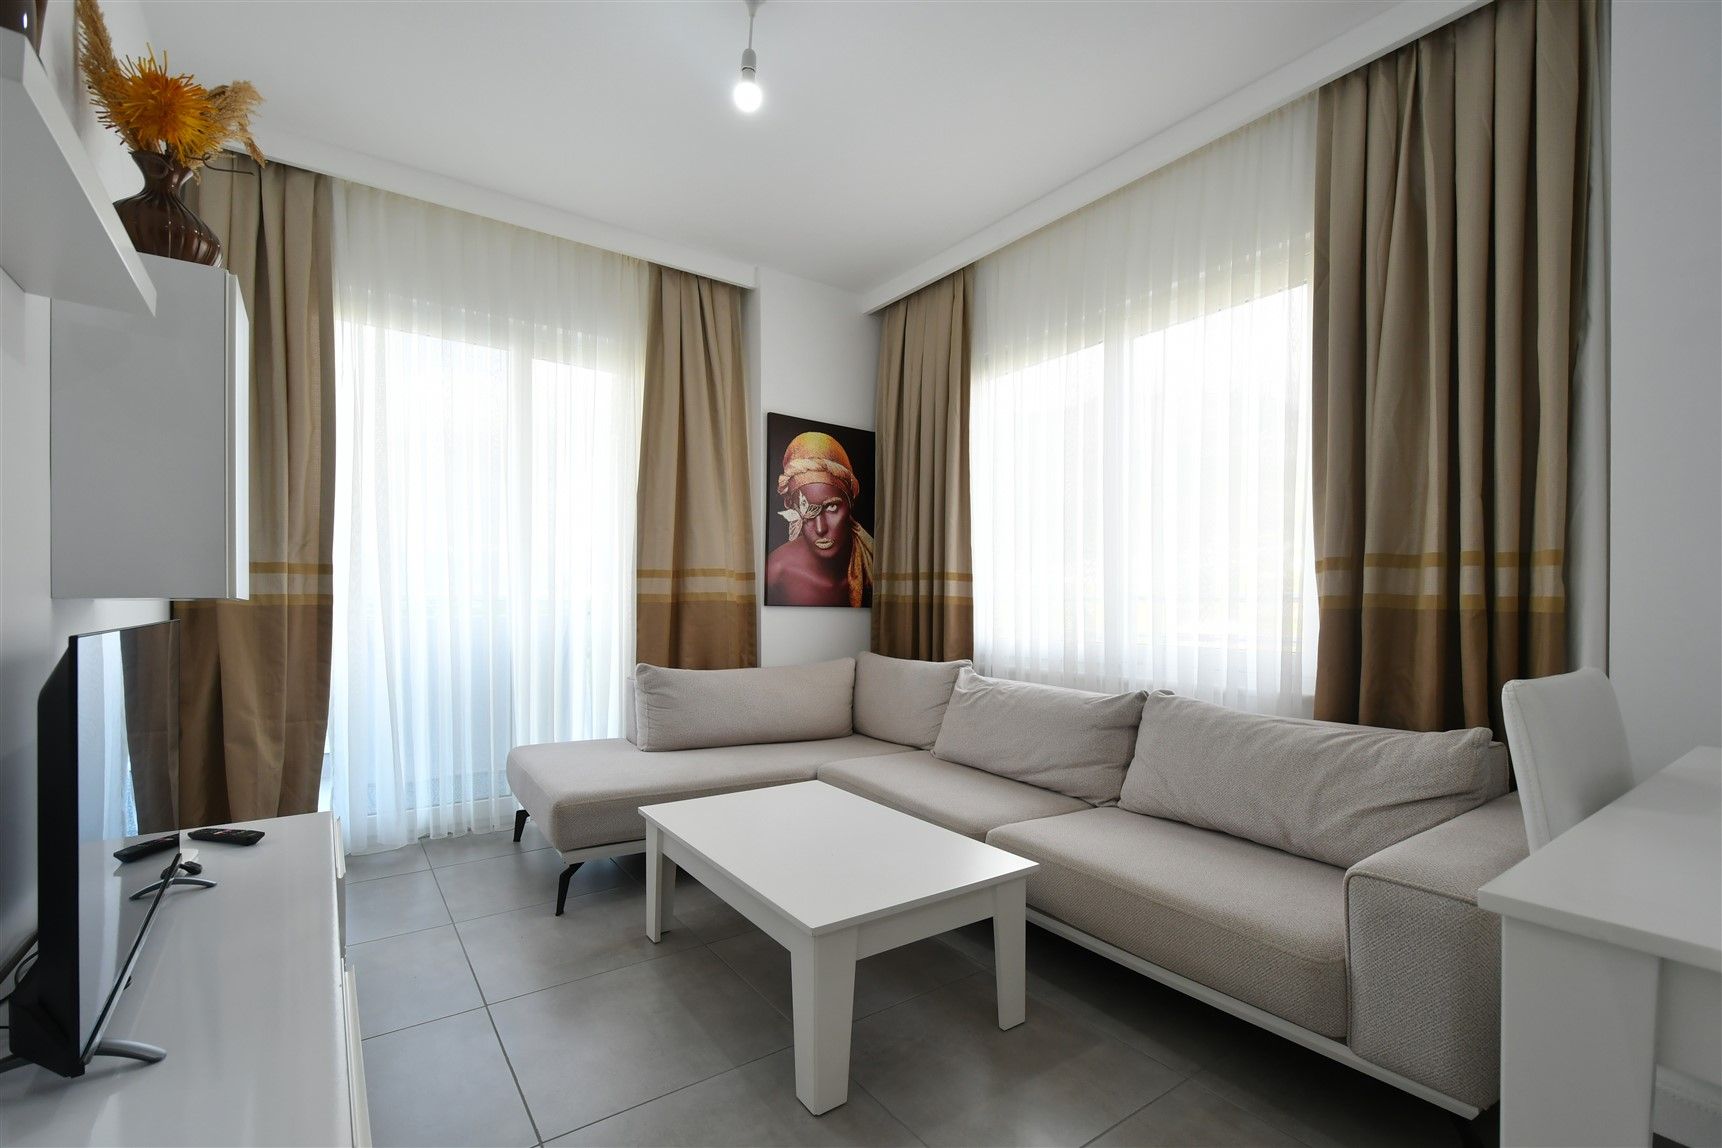 Furnished apartment in an excellent location - popular Mahmutlar district